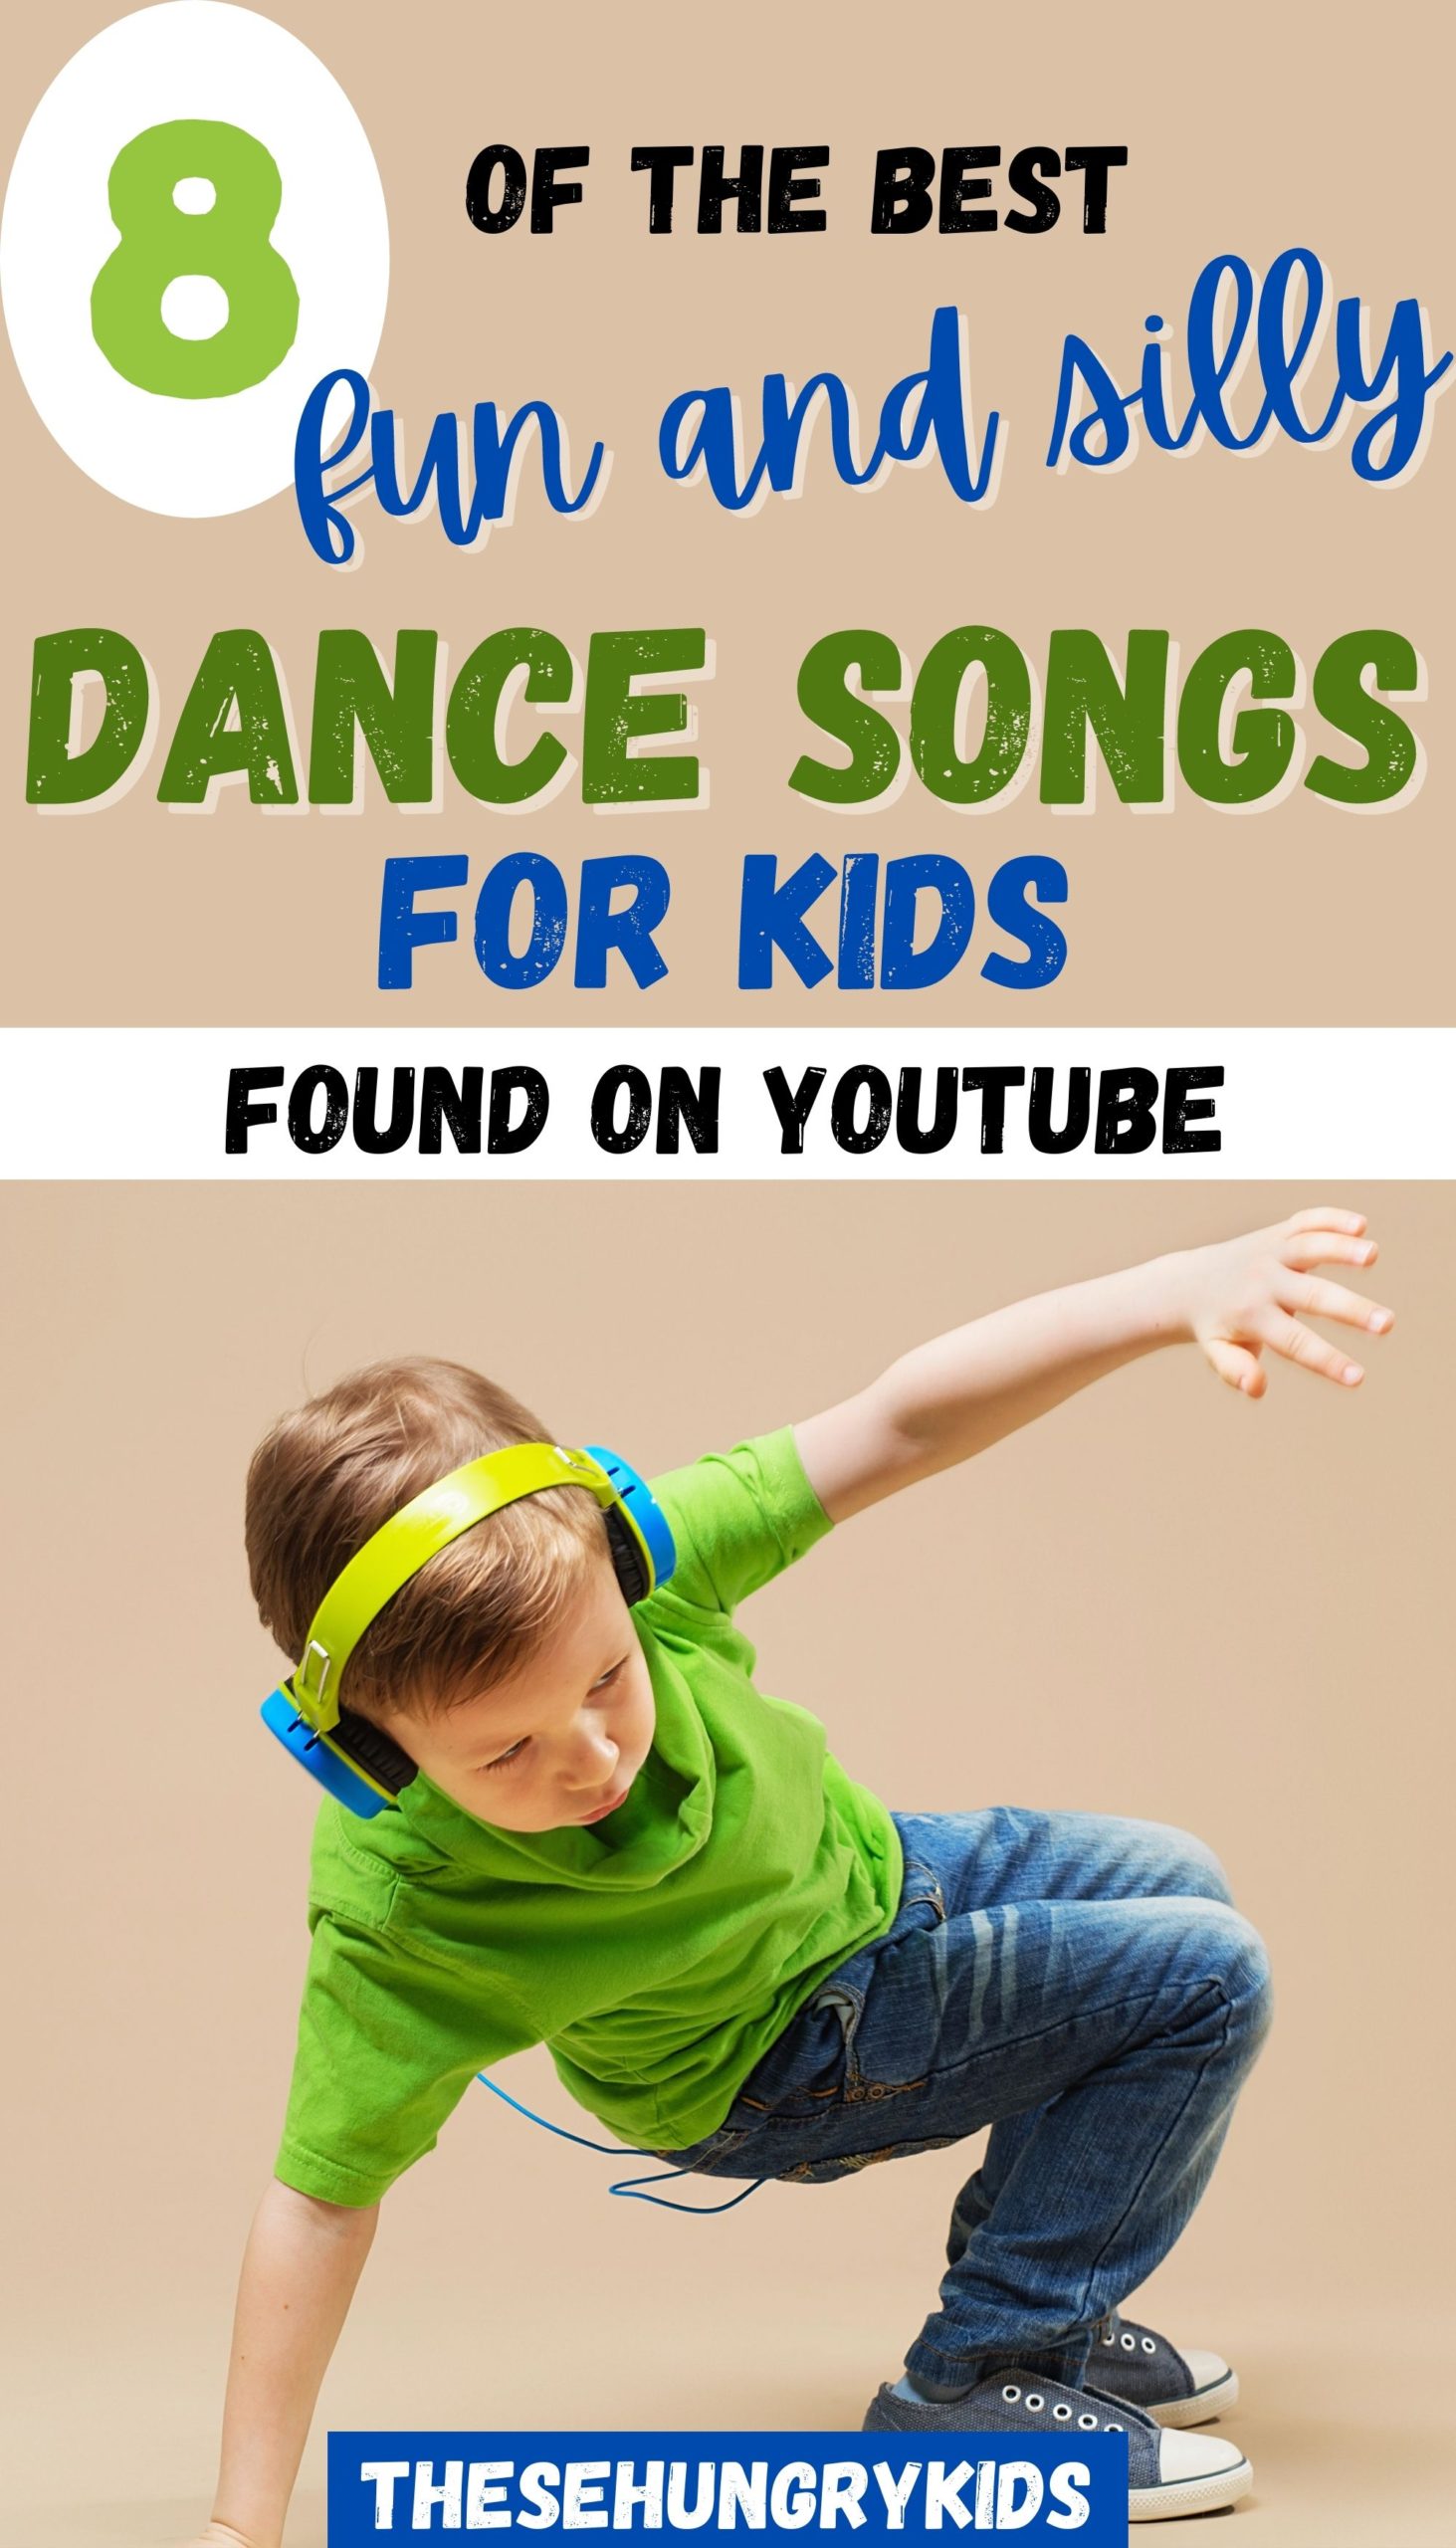 Silly Kids Dance Songs For Your Living Room Dance Party! These Hungry